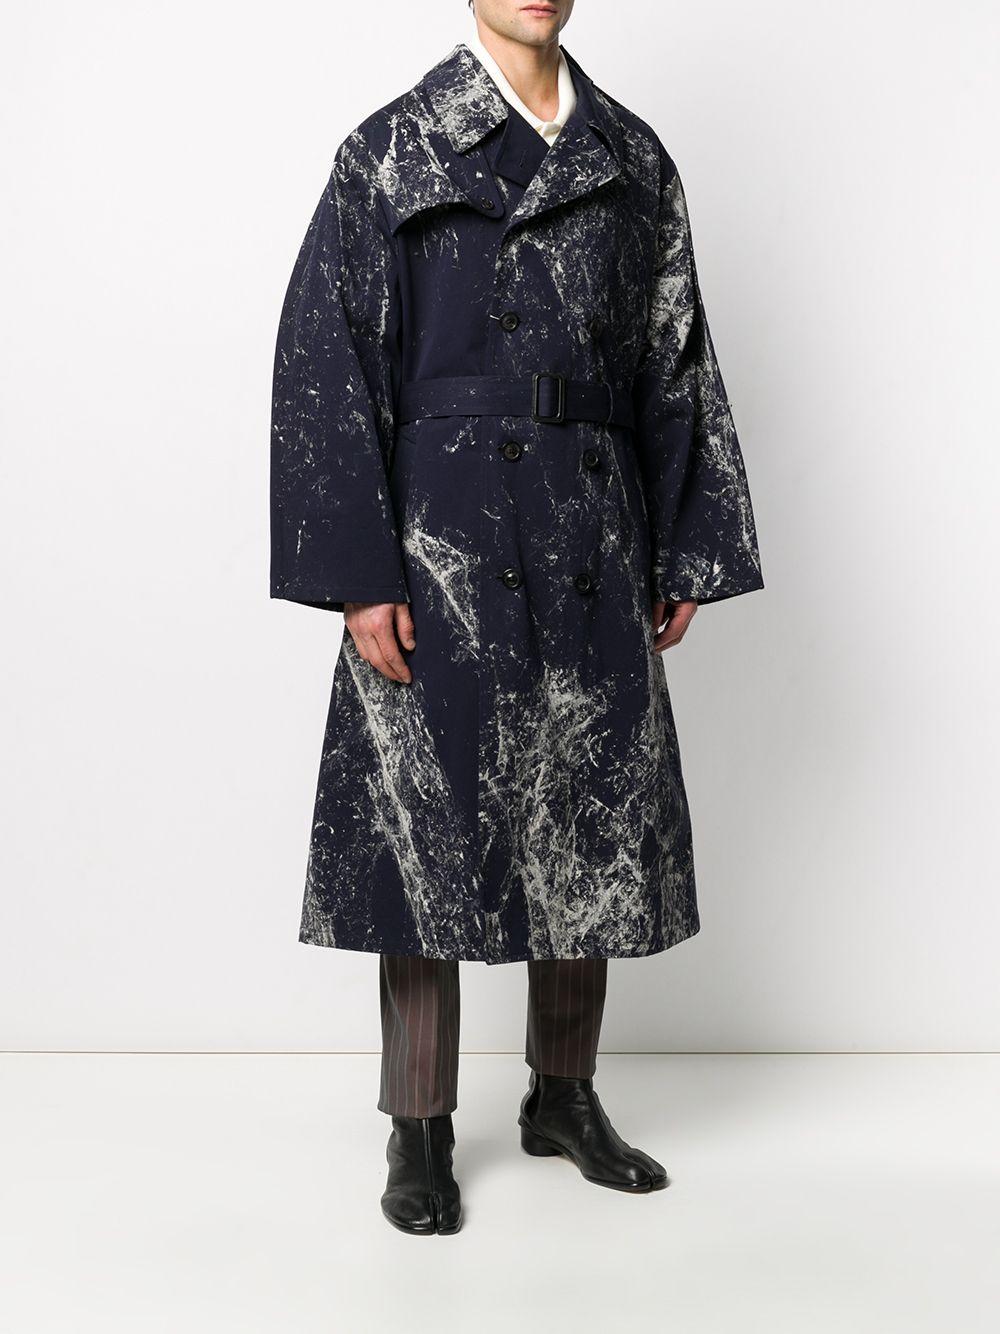 Maison Margiela Painted Trench Coat in Blue for Men - Lyst